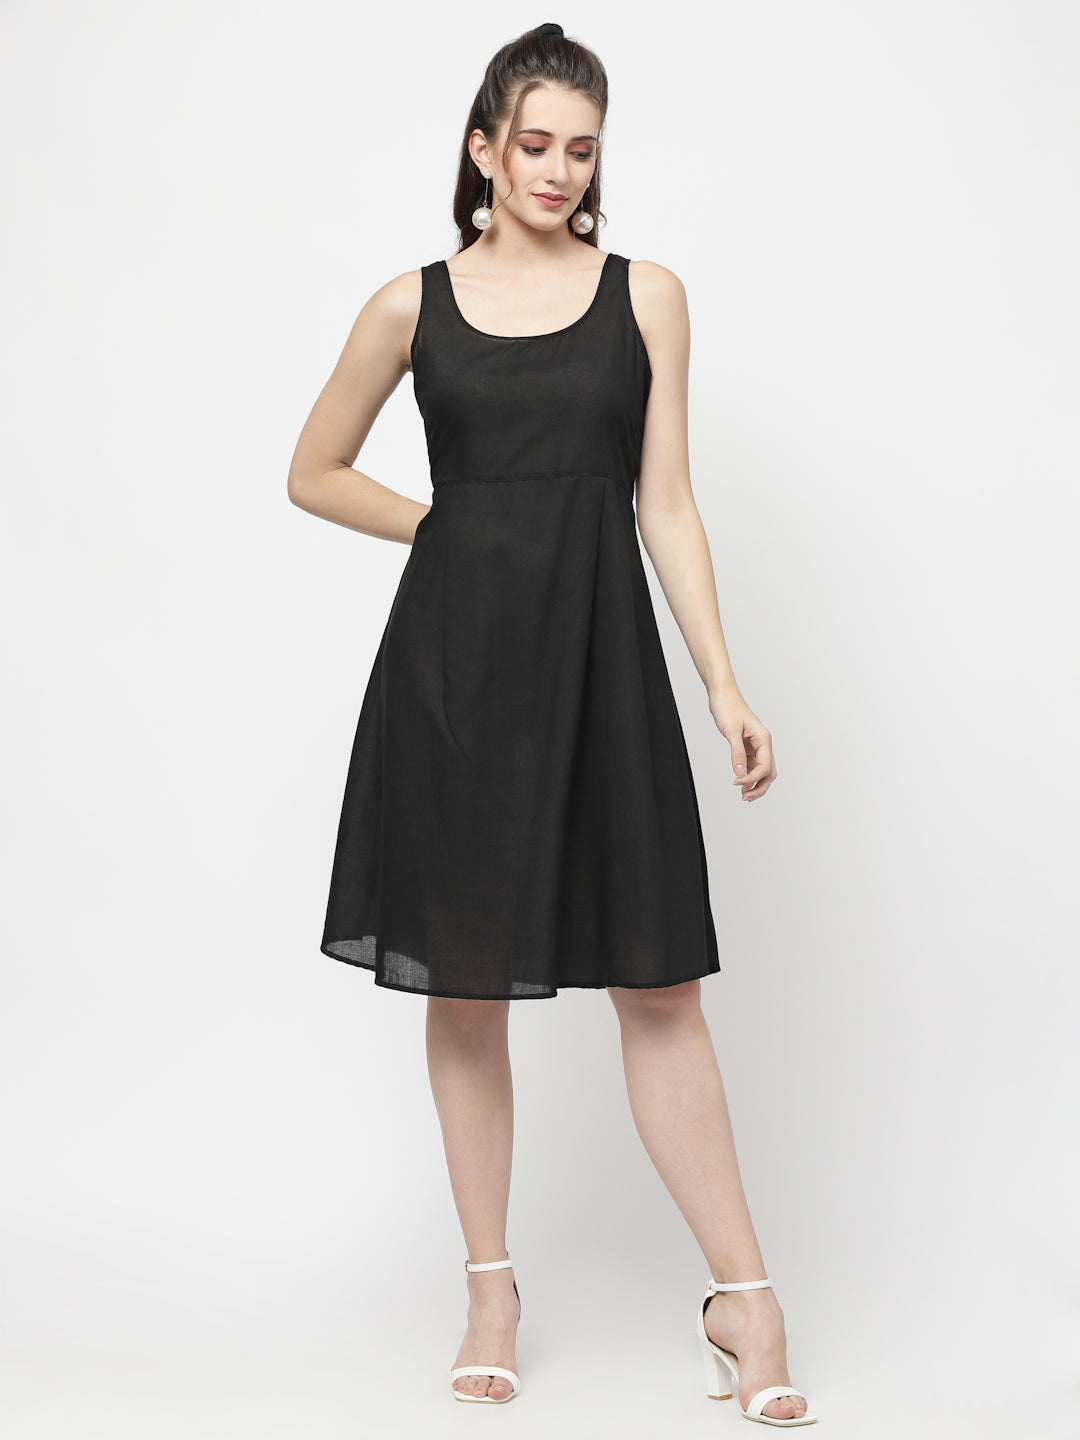 Terquois Black Dobby Two Layered Casual Dress With Collar-Neck Dresses TERQUOIS   